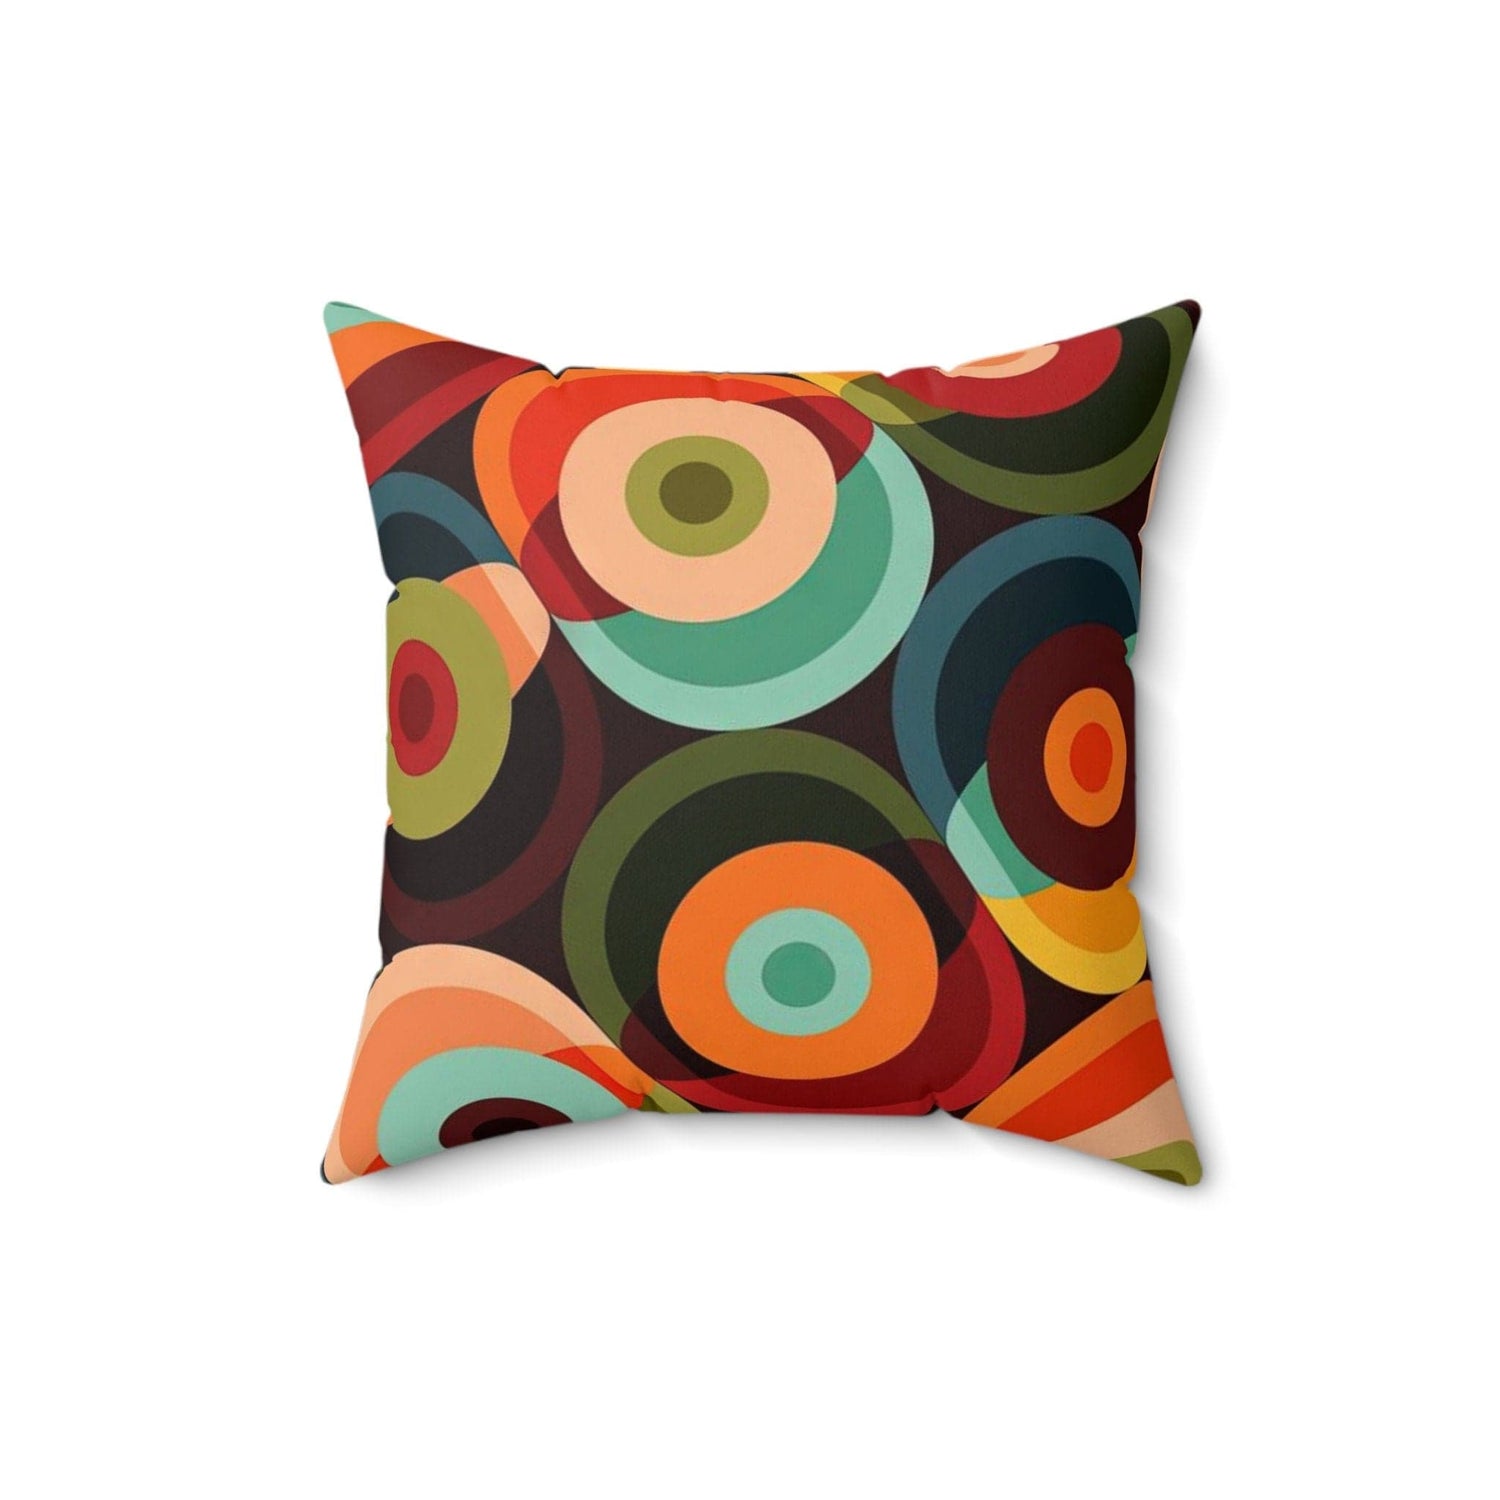 Kate McEnroe New York Retro Mid Mod Geo - Psychedelic Circles Throw Pillow, MCM Teal Orange, Yellow, Red Abstract Living Room, Bedroom Accent Pillow - 131282623Throw Pillows26154032508783369027